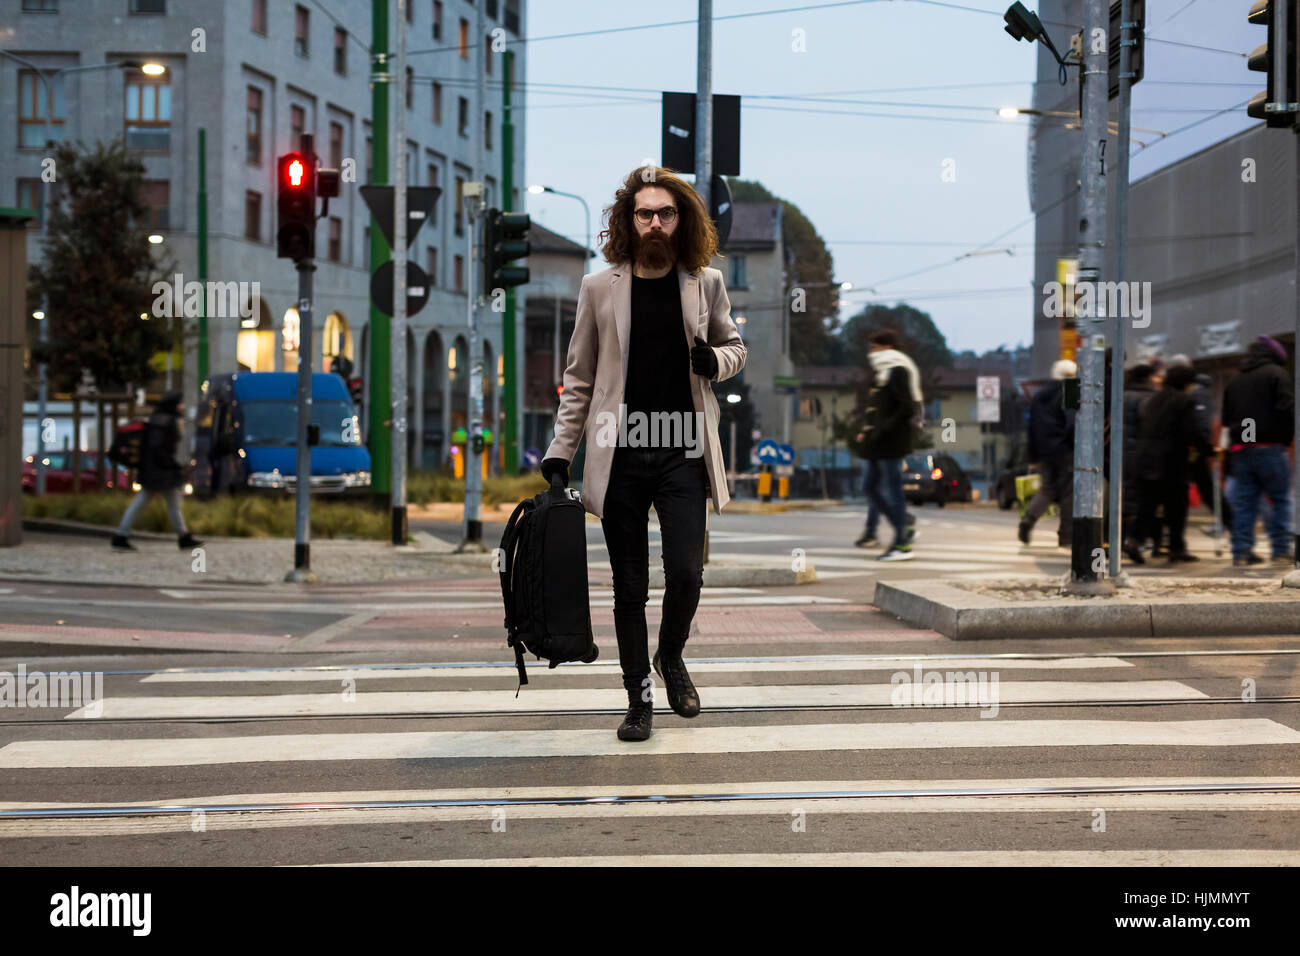 Stylish young man with bag crossing street on zebra crossing Stock Photo